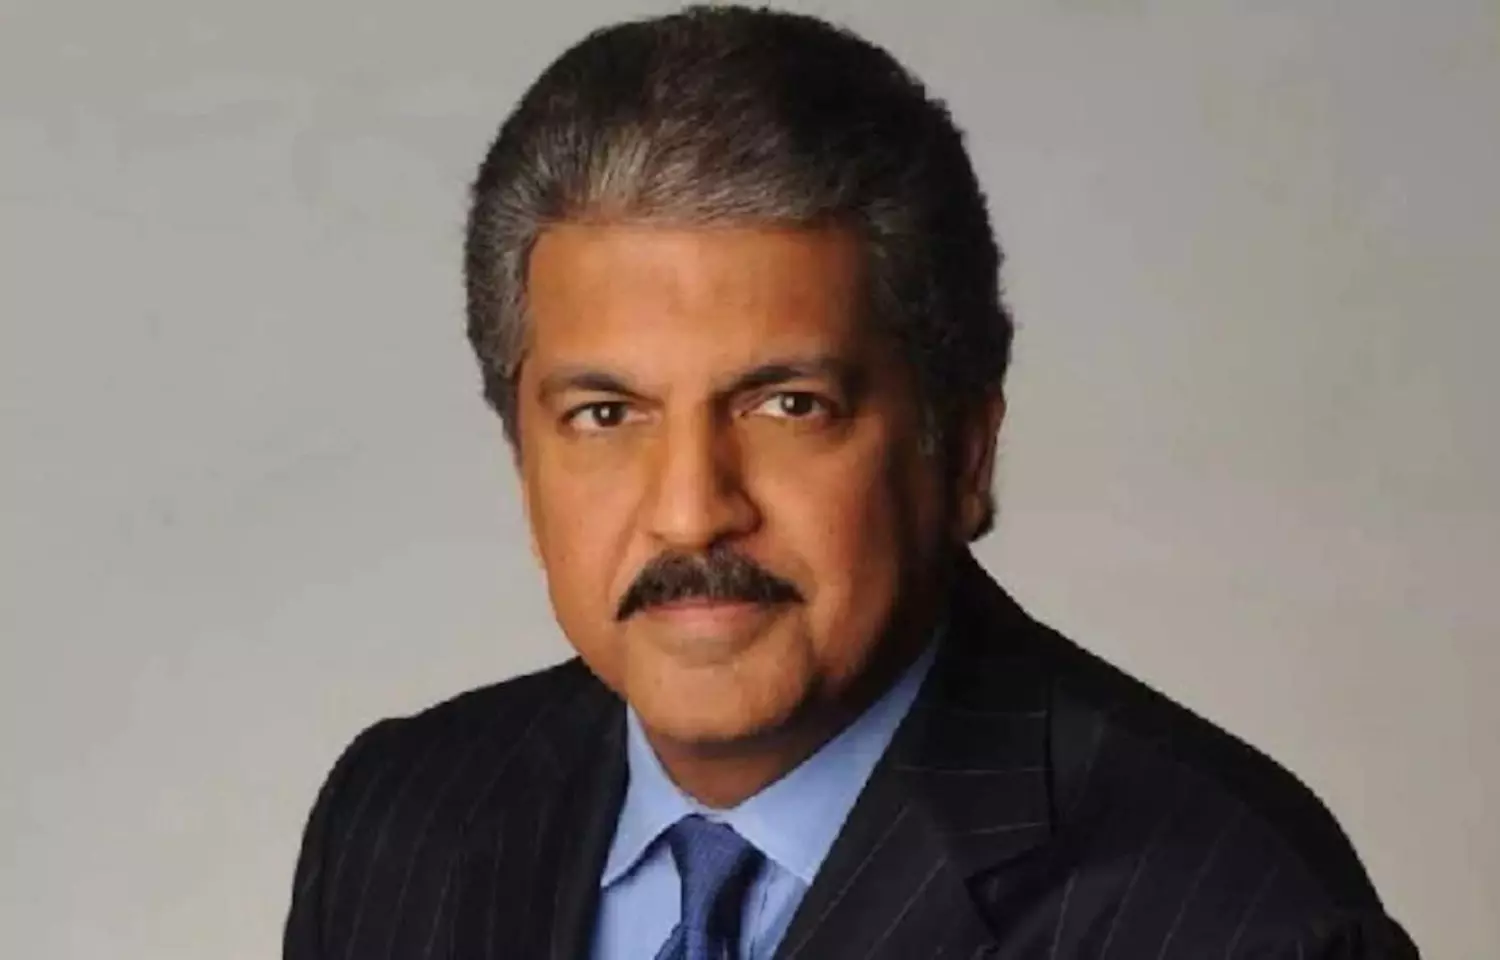 Corporates respond to Modi plea, Anand Mahindra promises new medical colleges